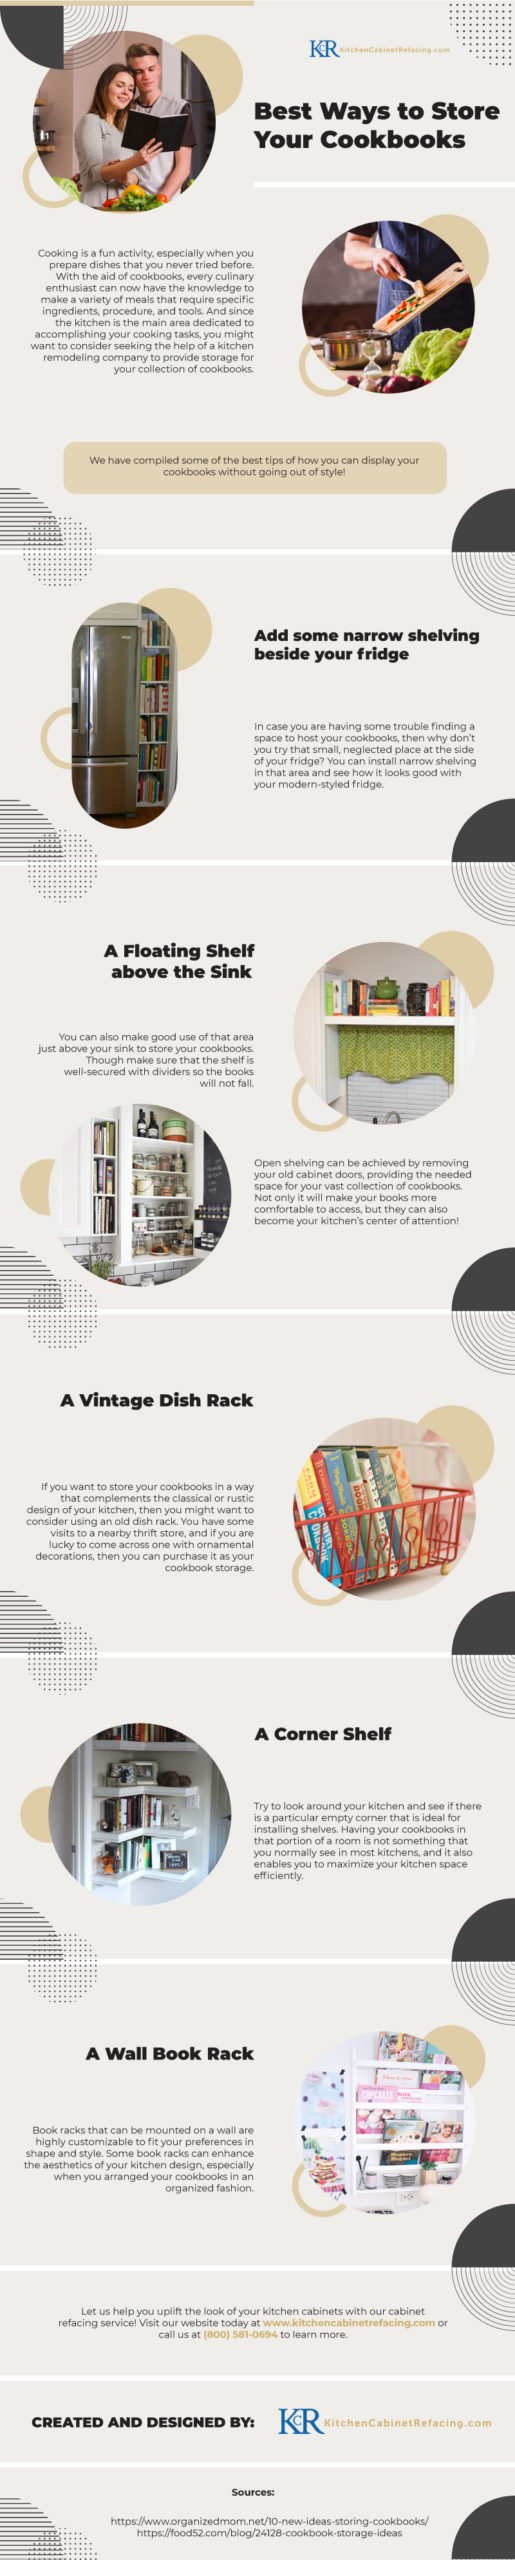 Best-Ways-to-Store-Your-Cookbooks Infographic